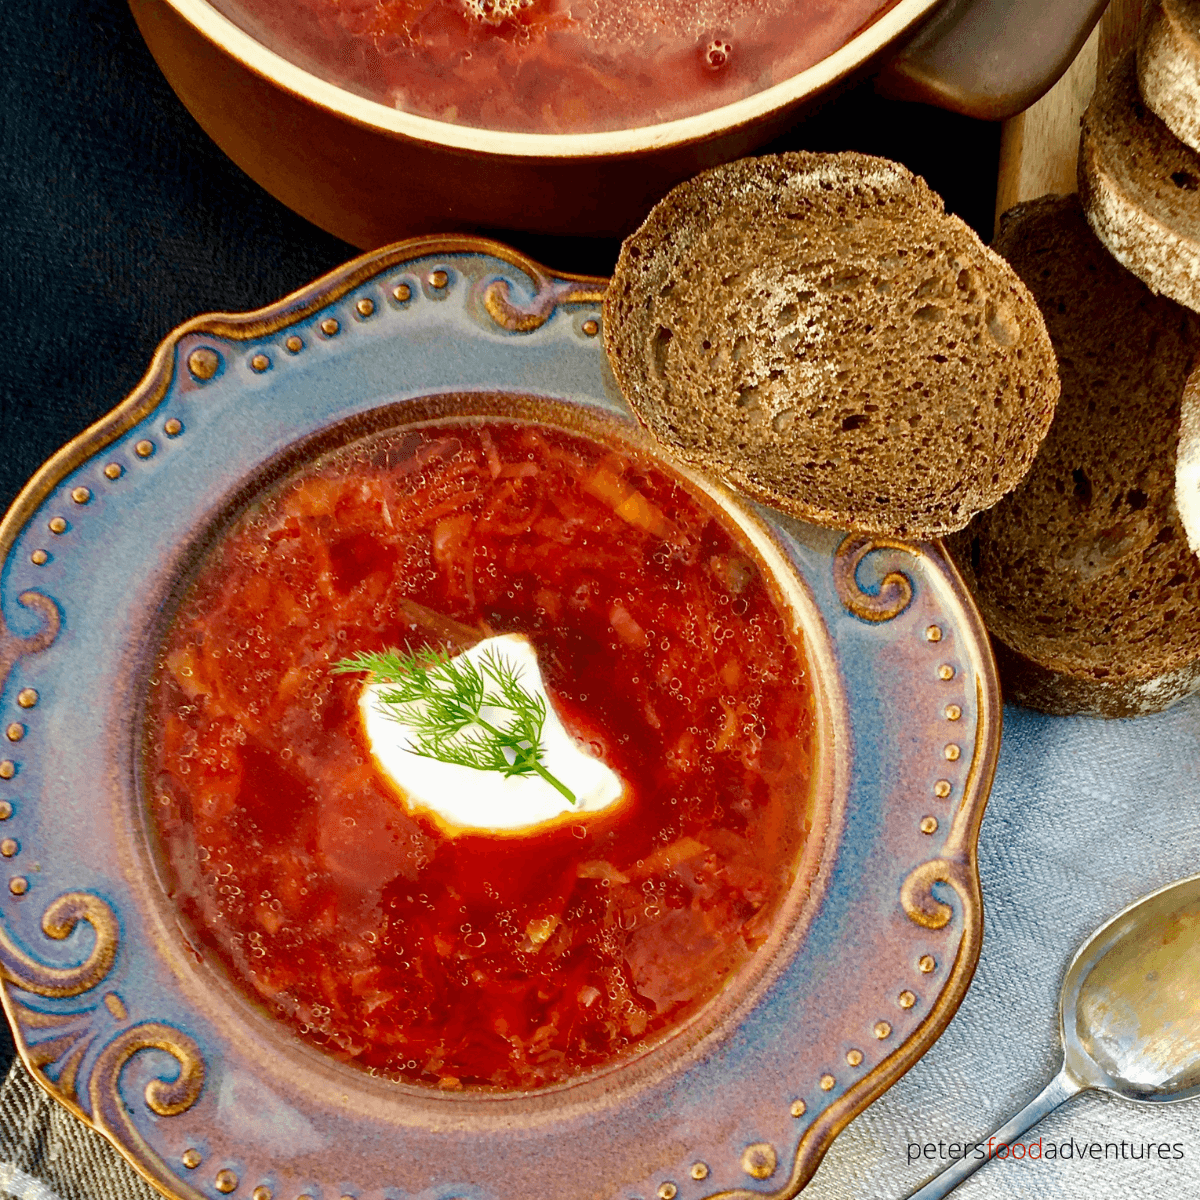 Authentic Beet Borscht with a meaty broth, cabbage, carrots, potatoes and beets. The tastiest beet soup that's easy, delicious and heartwarming. Borsch (Борщ) is so popular, that it was even eaten by Soviet cosmonauts in space.